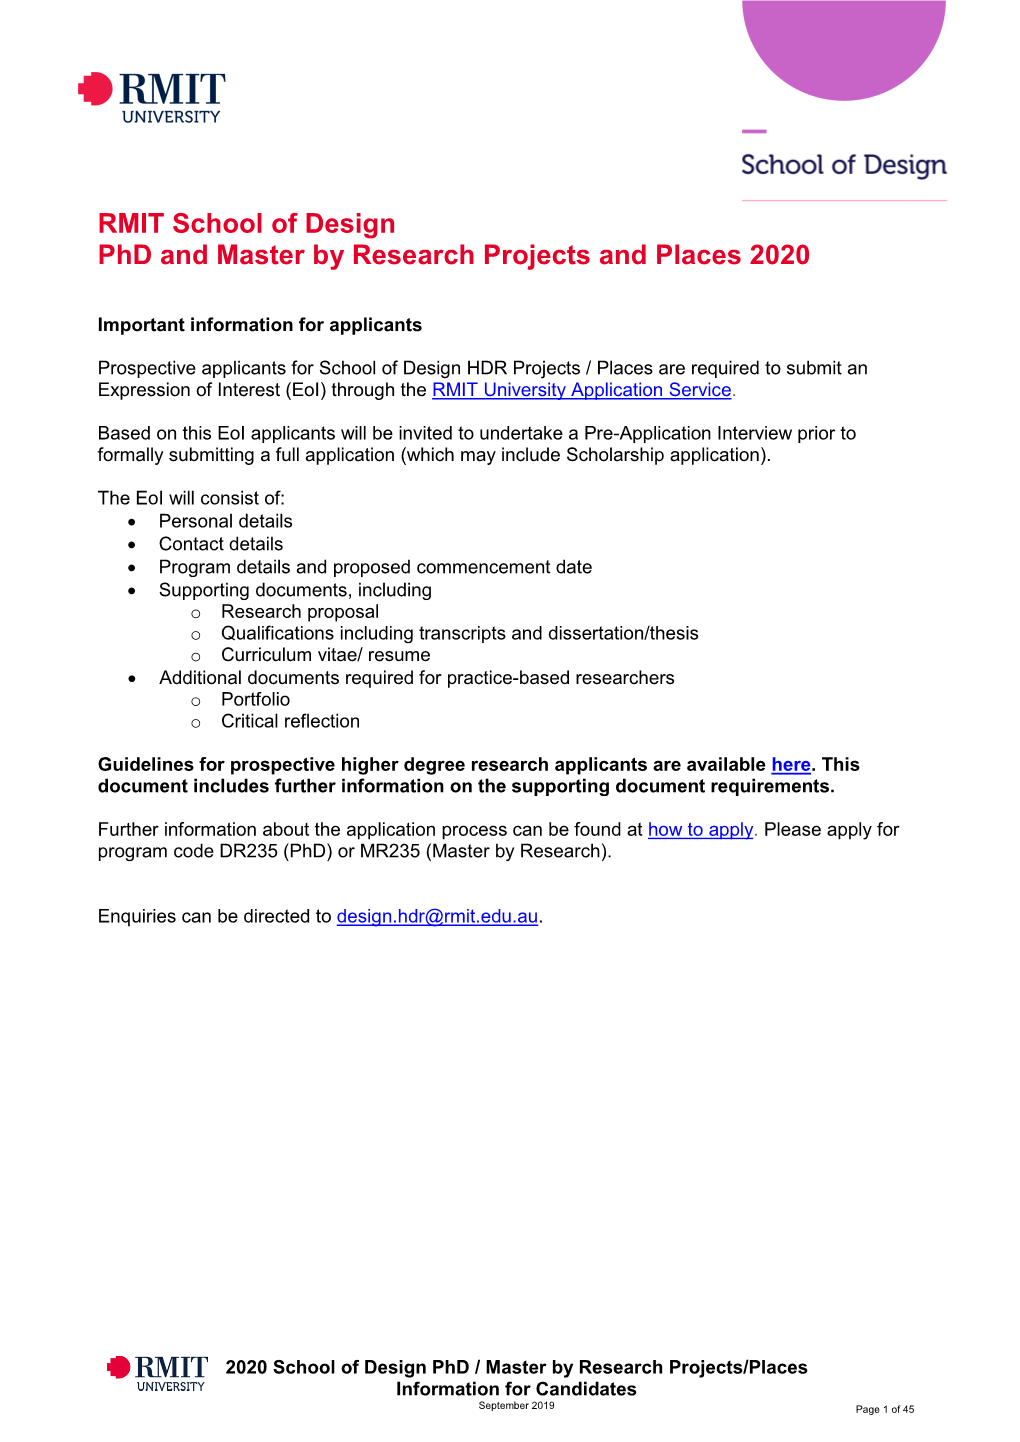 RMIT School of Design Phd and Master by Research Projects and Places 2020